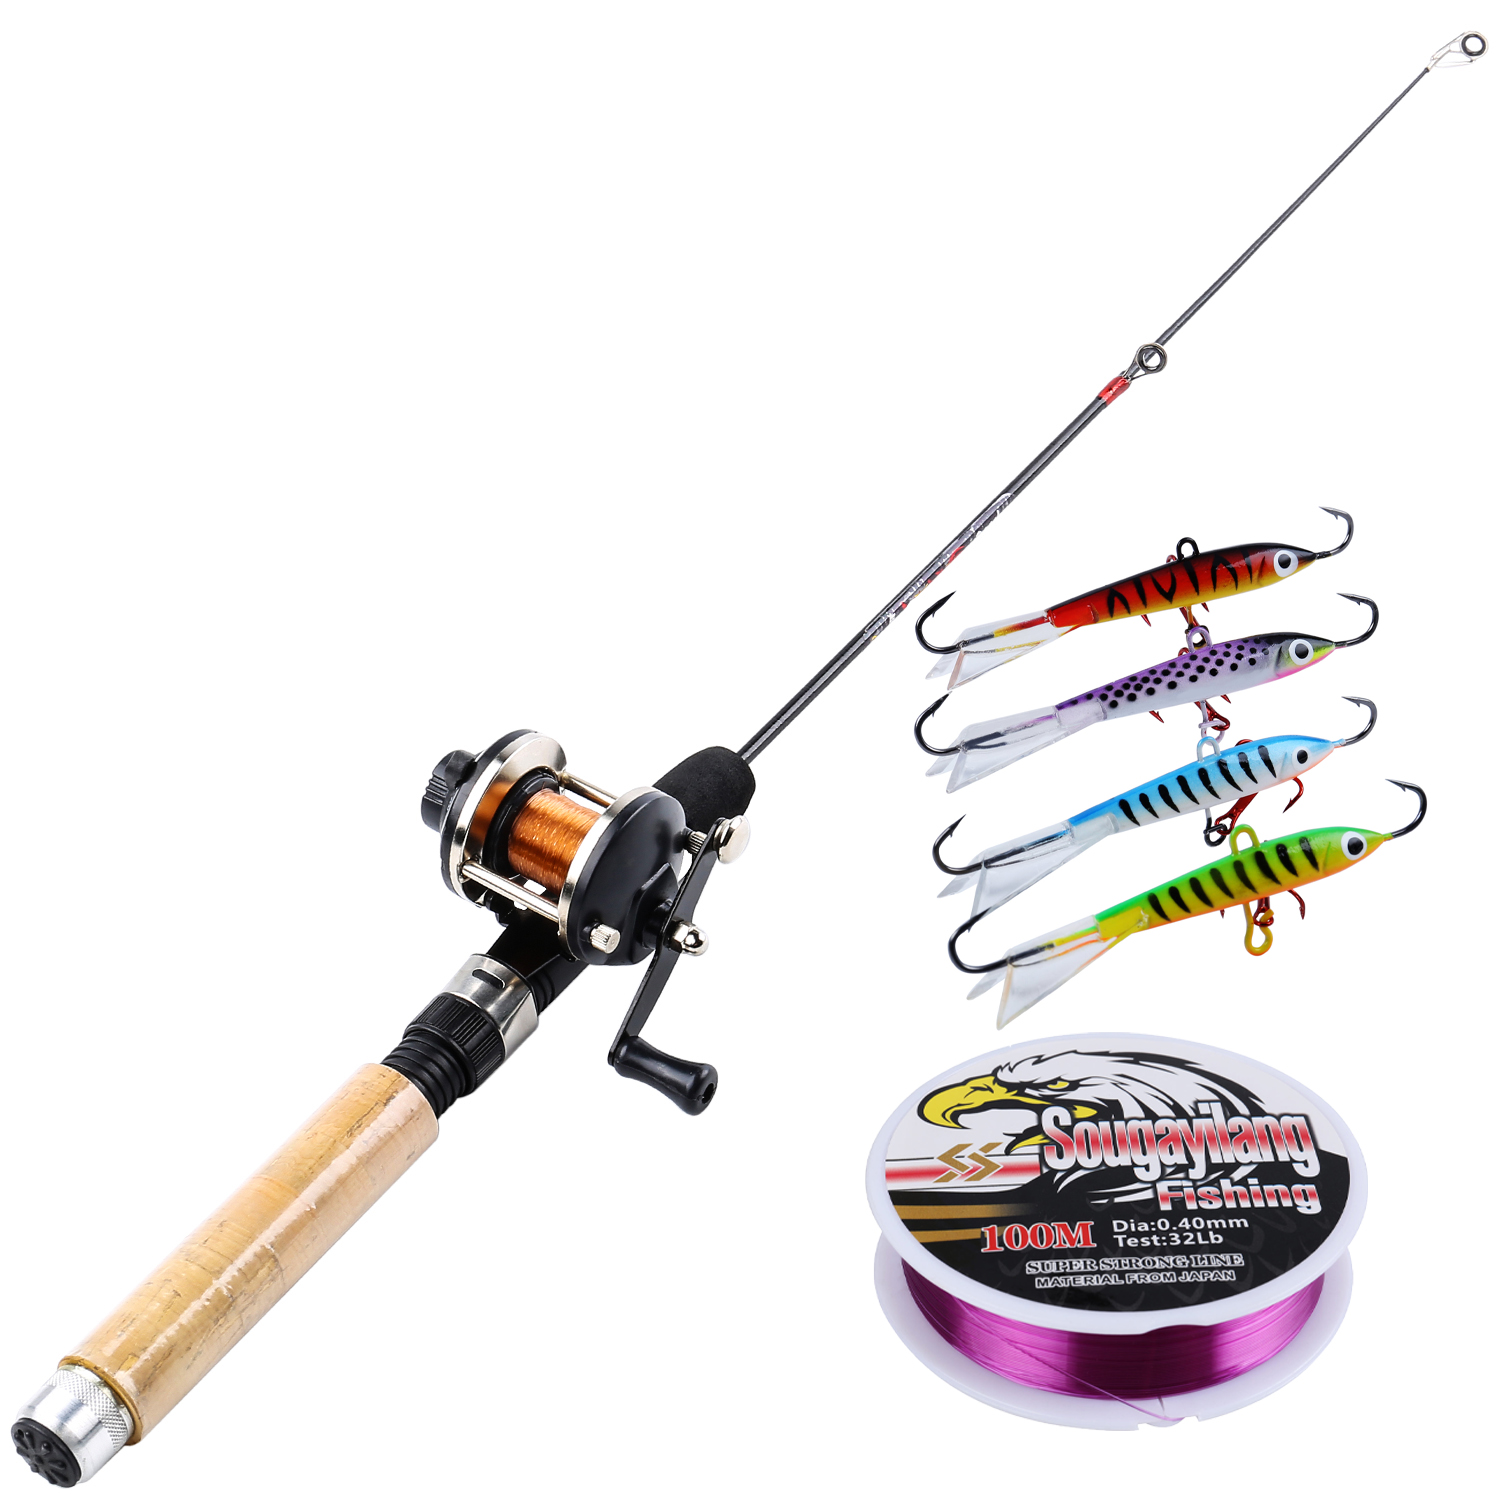 Sougayilang 26in Winter Ice Fishing Rod and Mini Trolling Reel Combos - with Fishing Line Lures - image 1 of 9